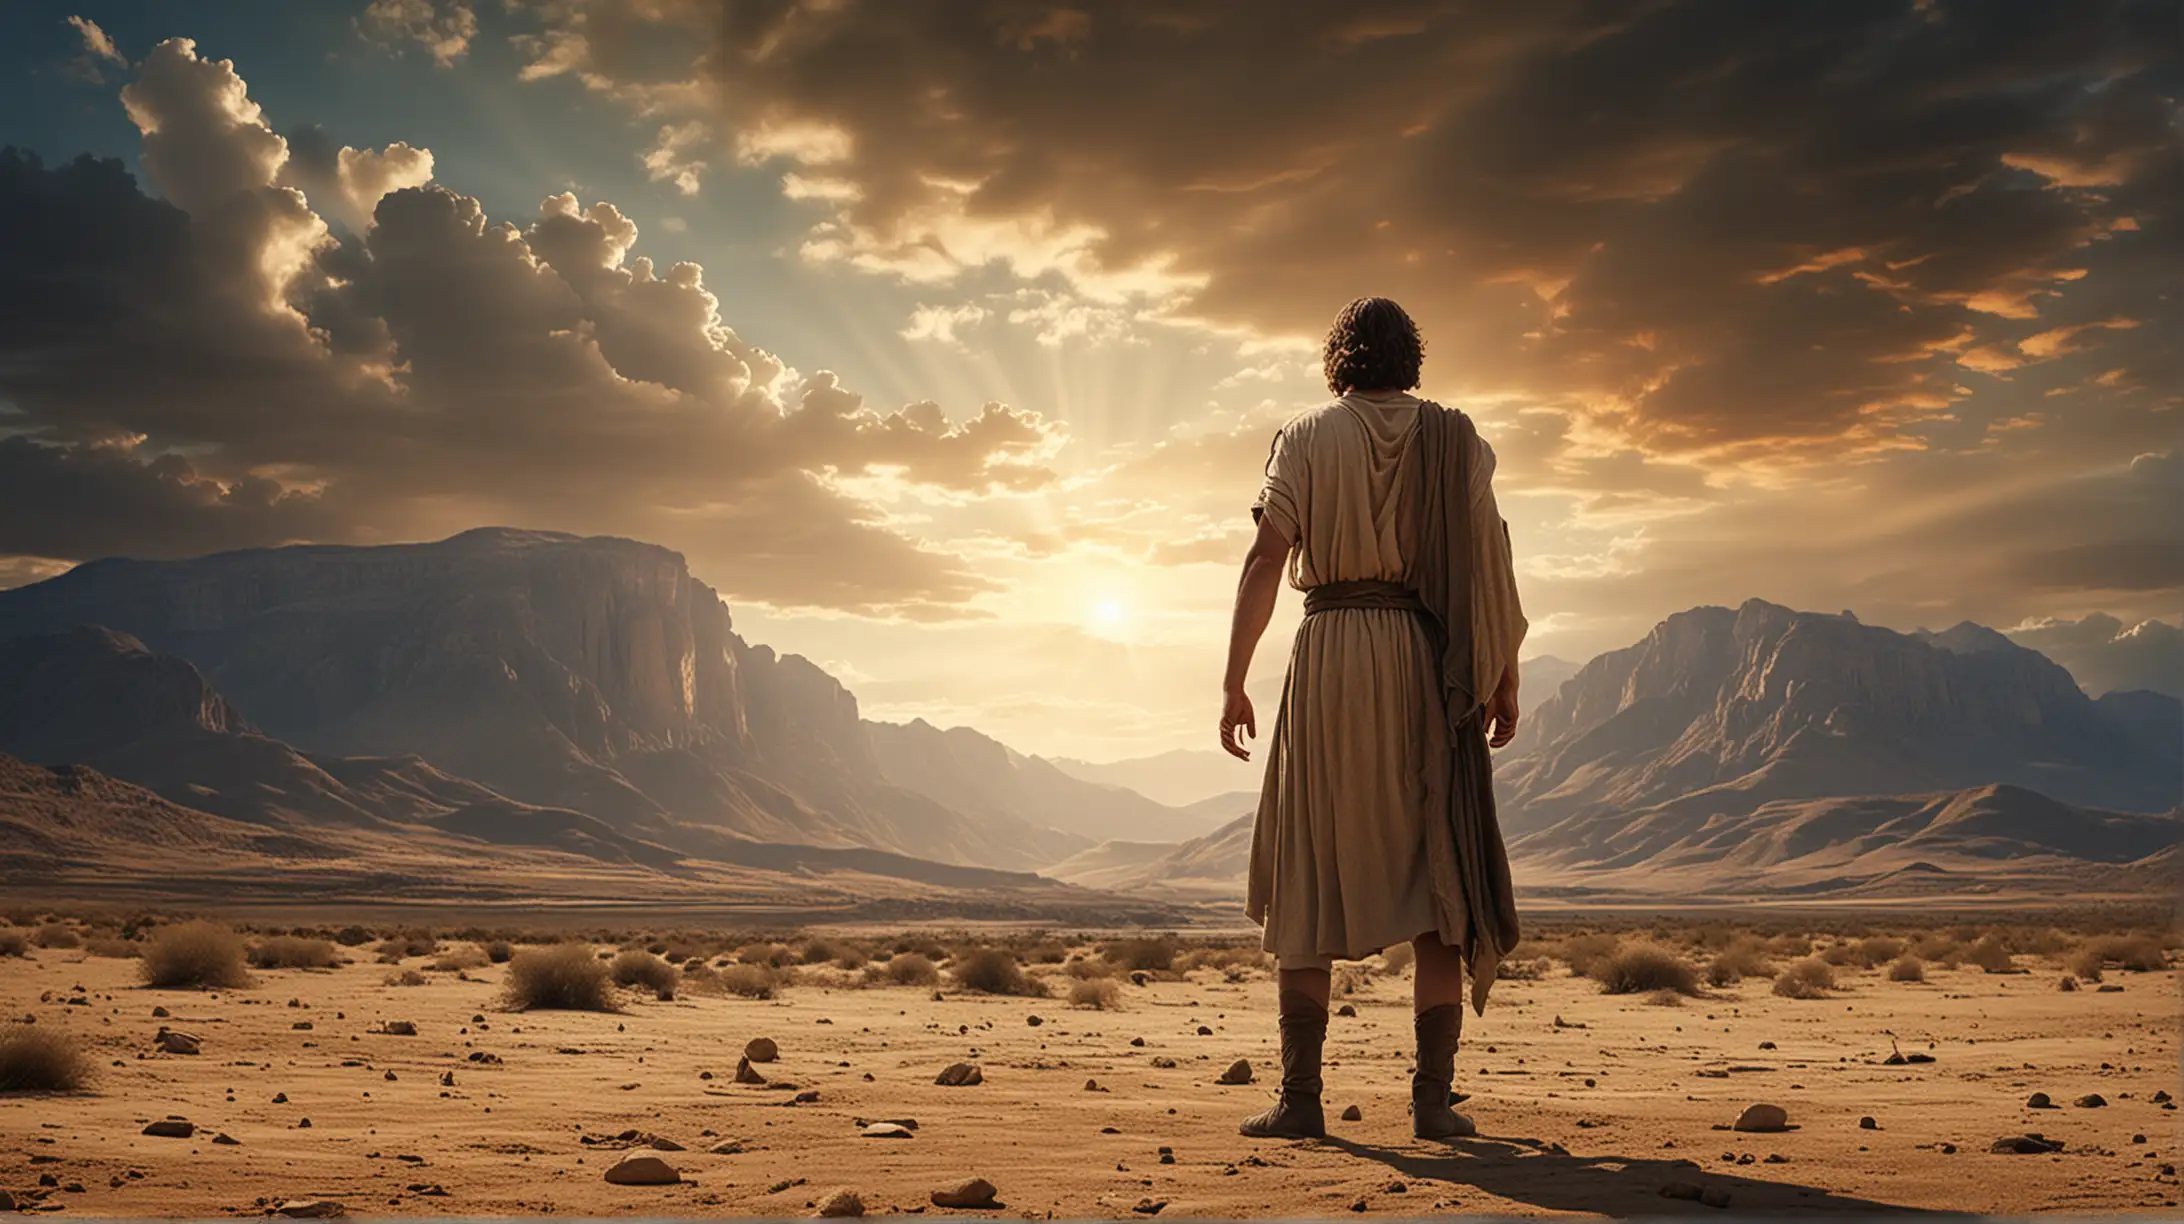 Biblical Giant Confronting Young Man in Desert Landscape